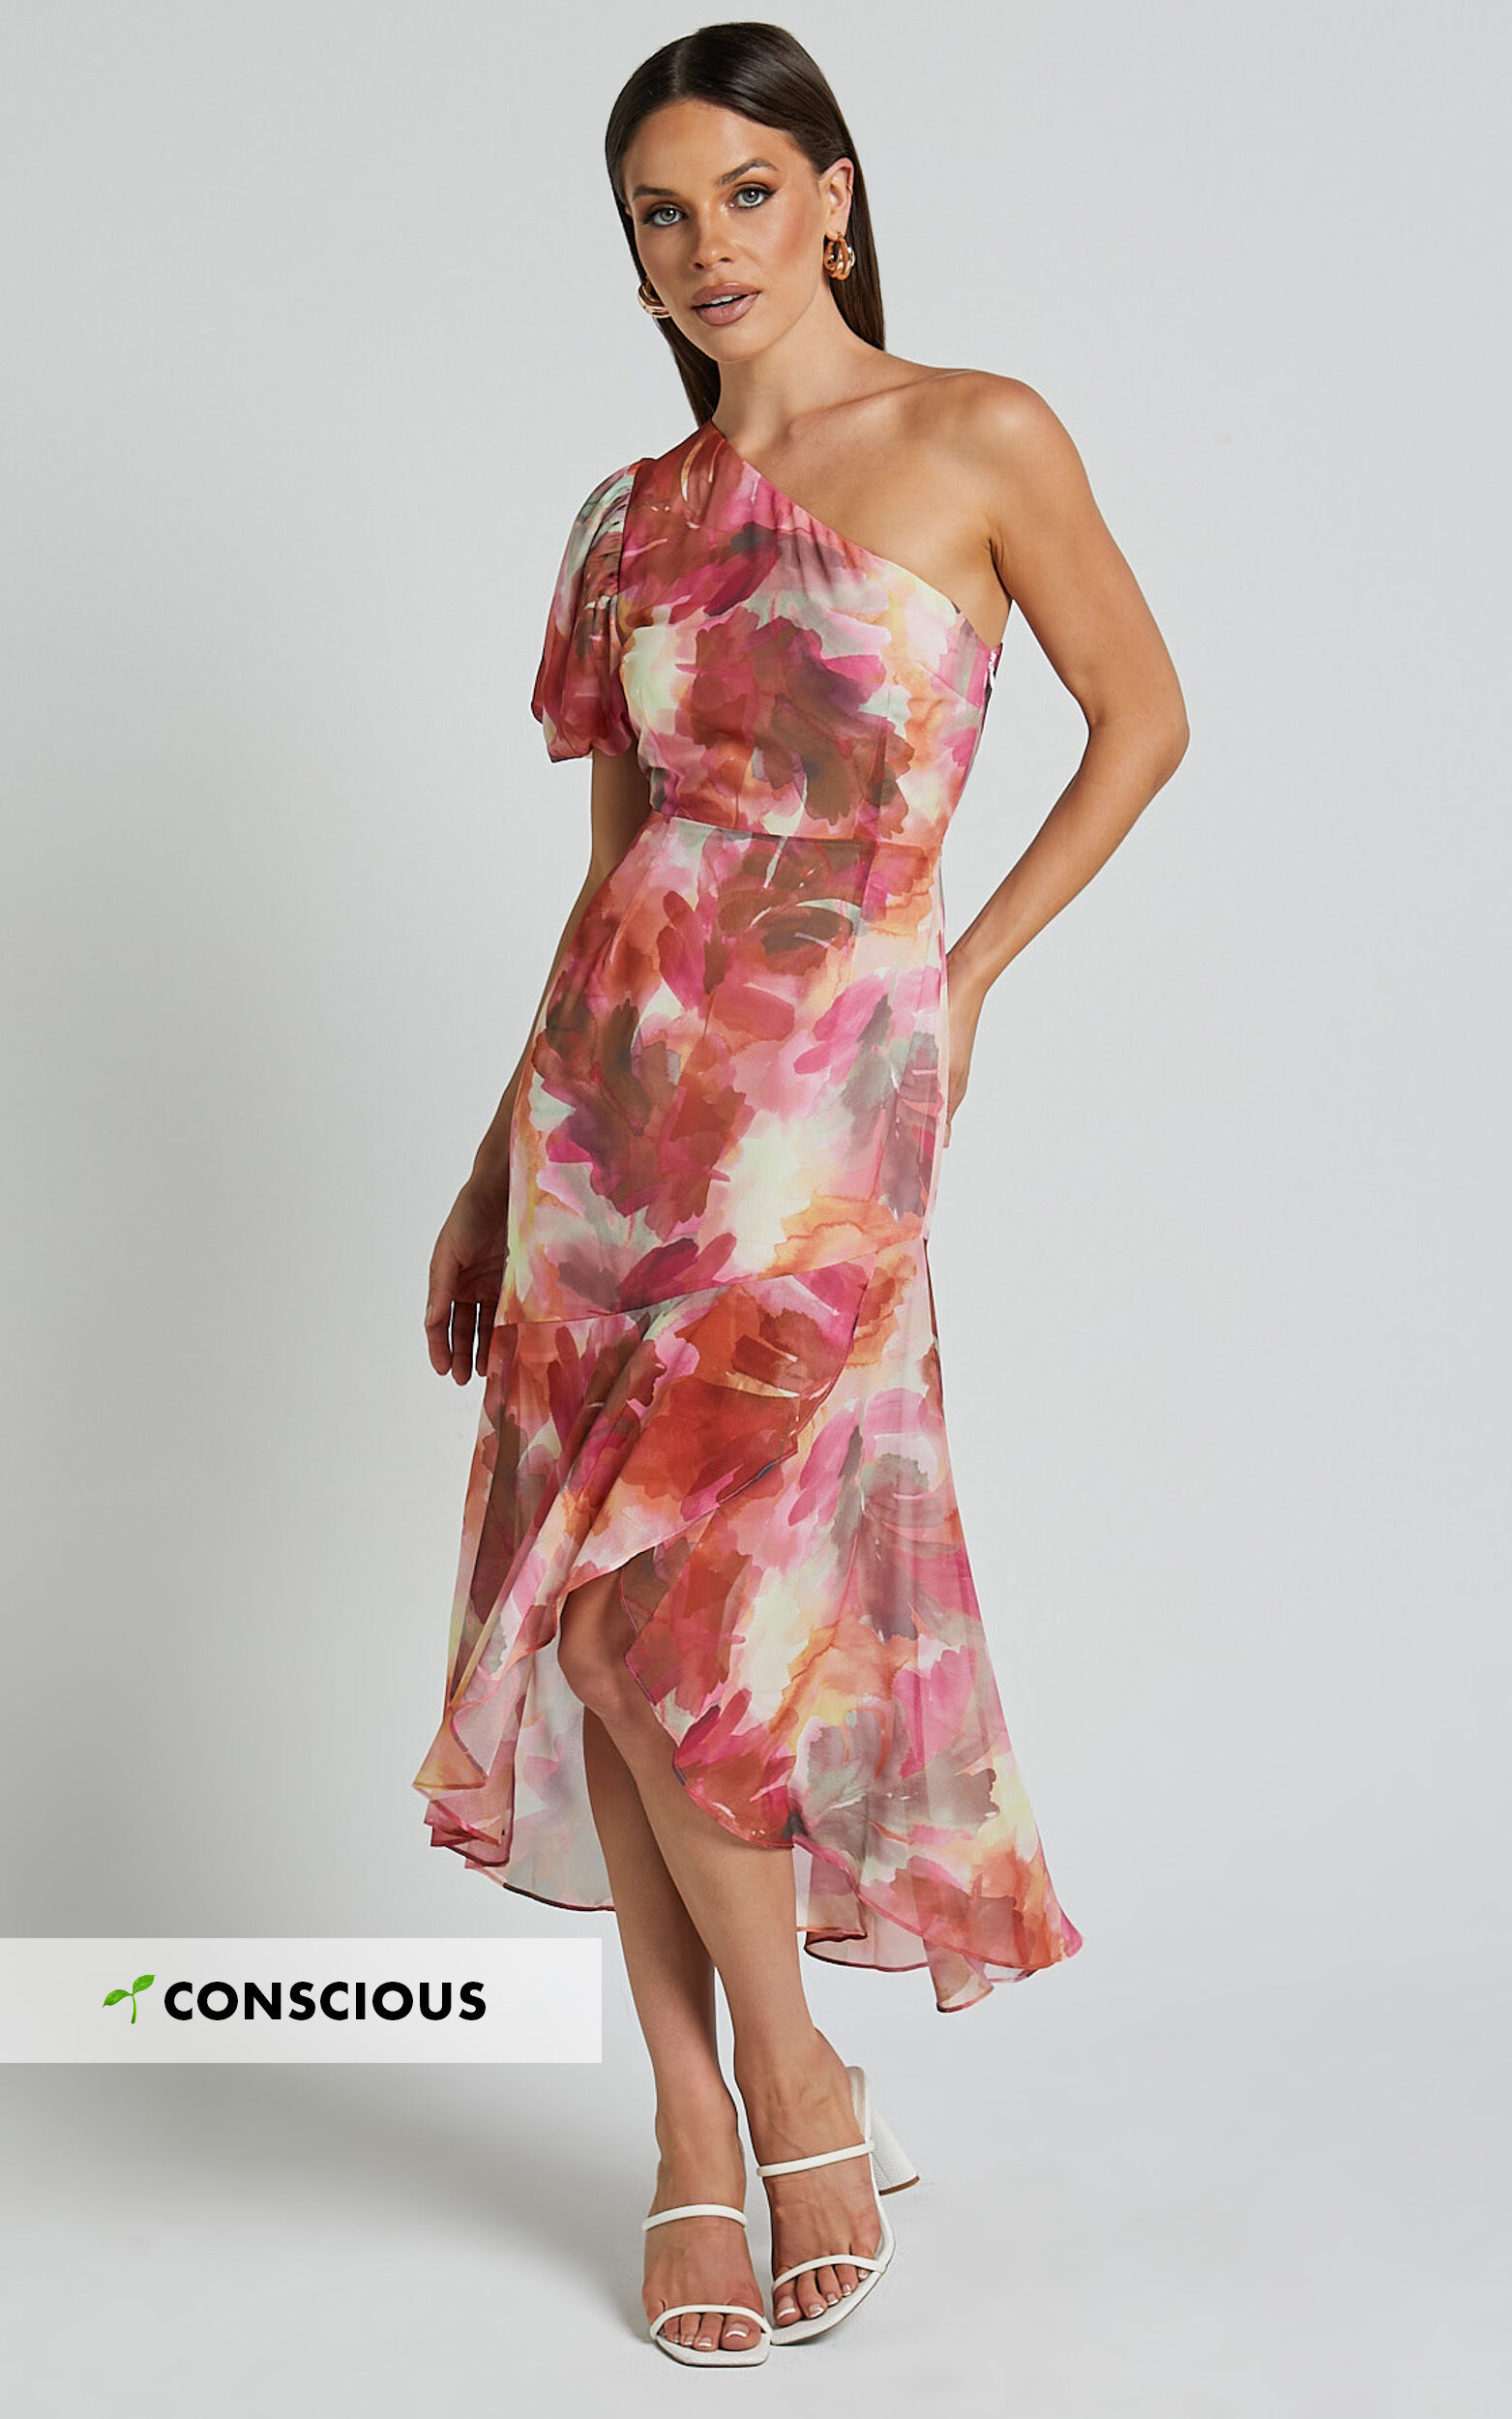 Labelle Midi Dress - Recycled Polyester One Shoulder Asymmetric Dress in Haze Floral - 06, WHT1